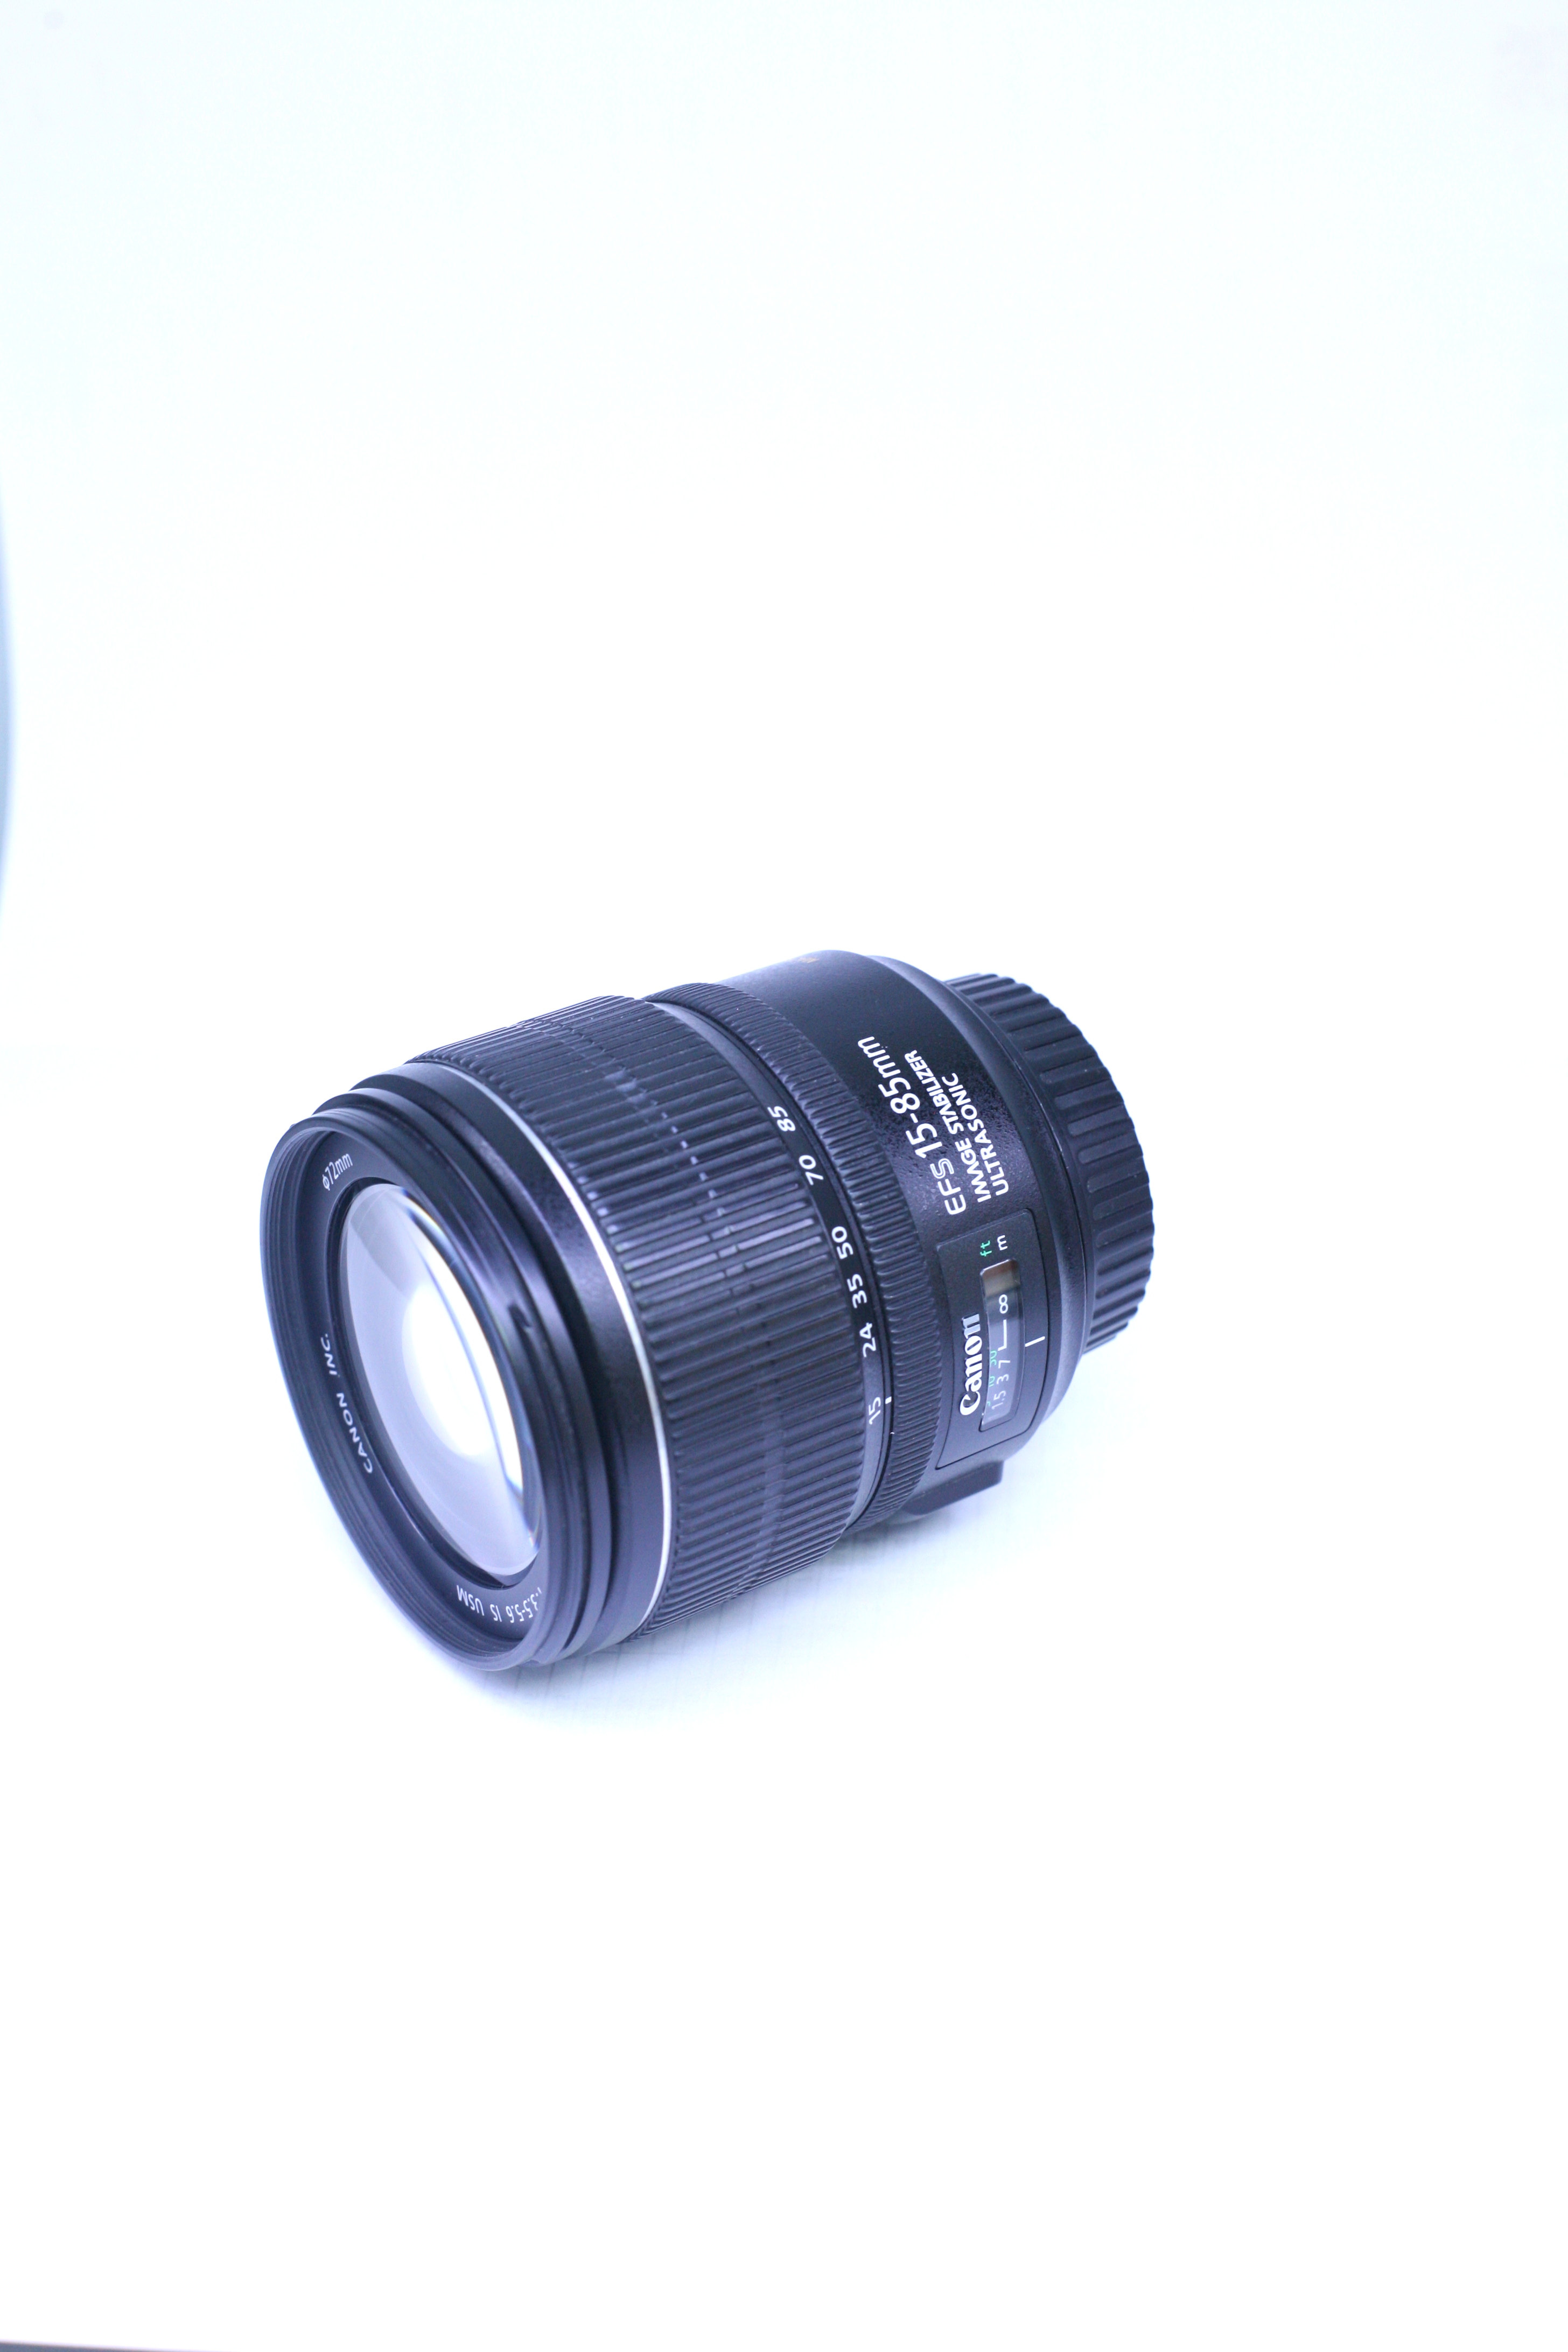  Canon EF-S 15-85mm f/3.5-5.6 IS USM ( 5-)